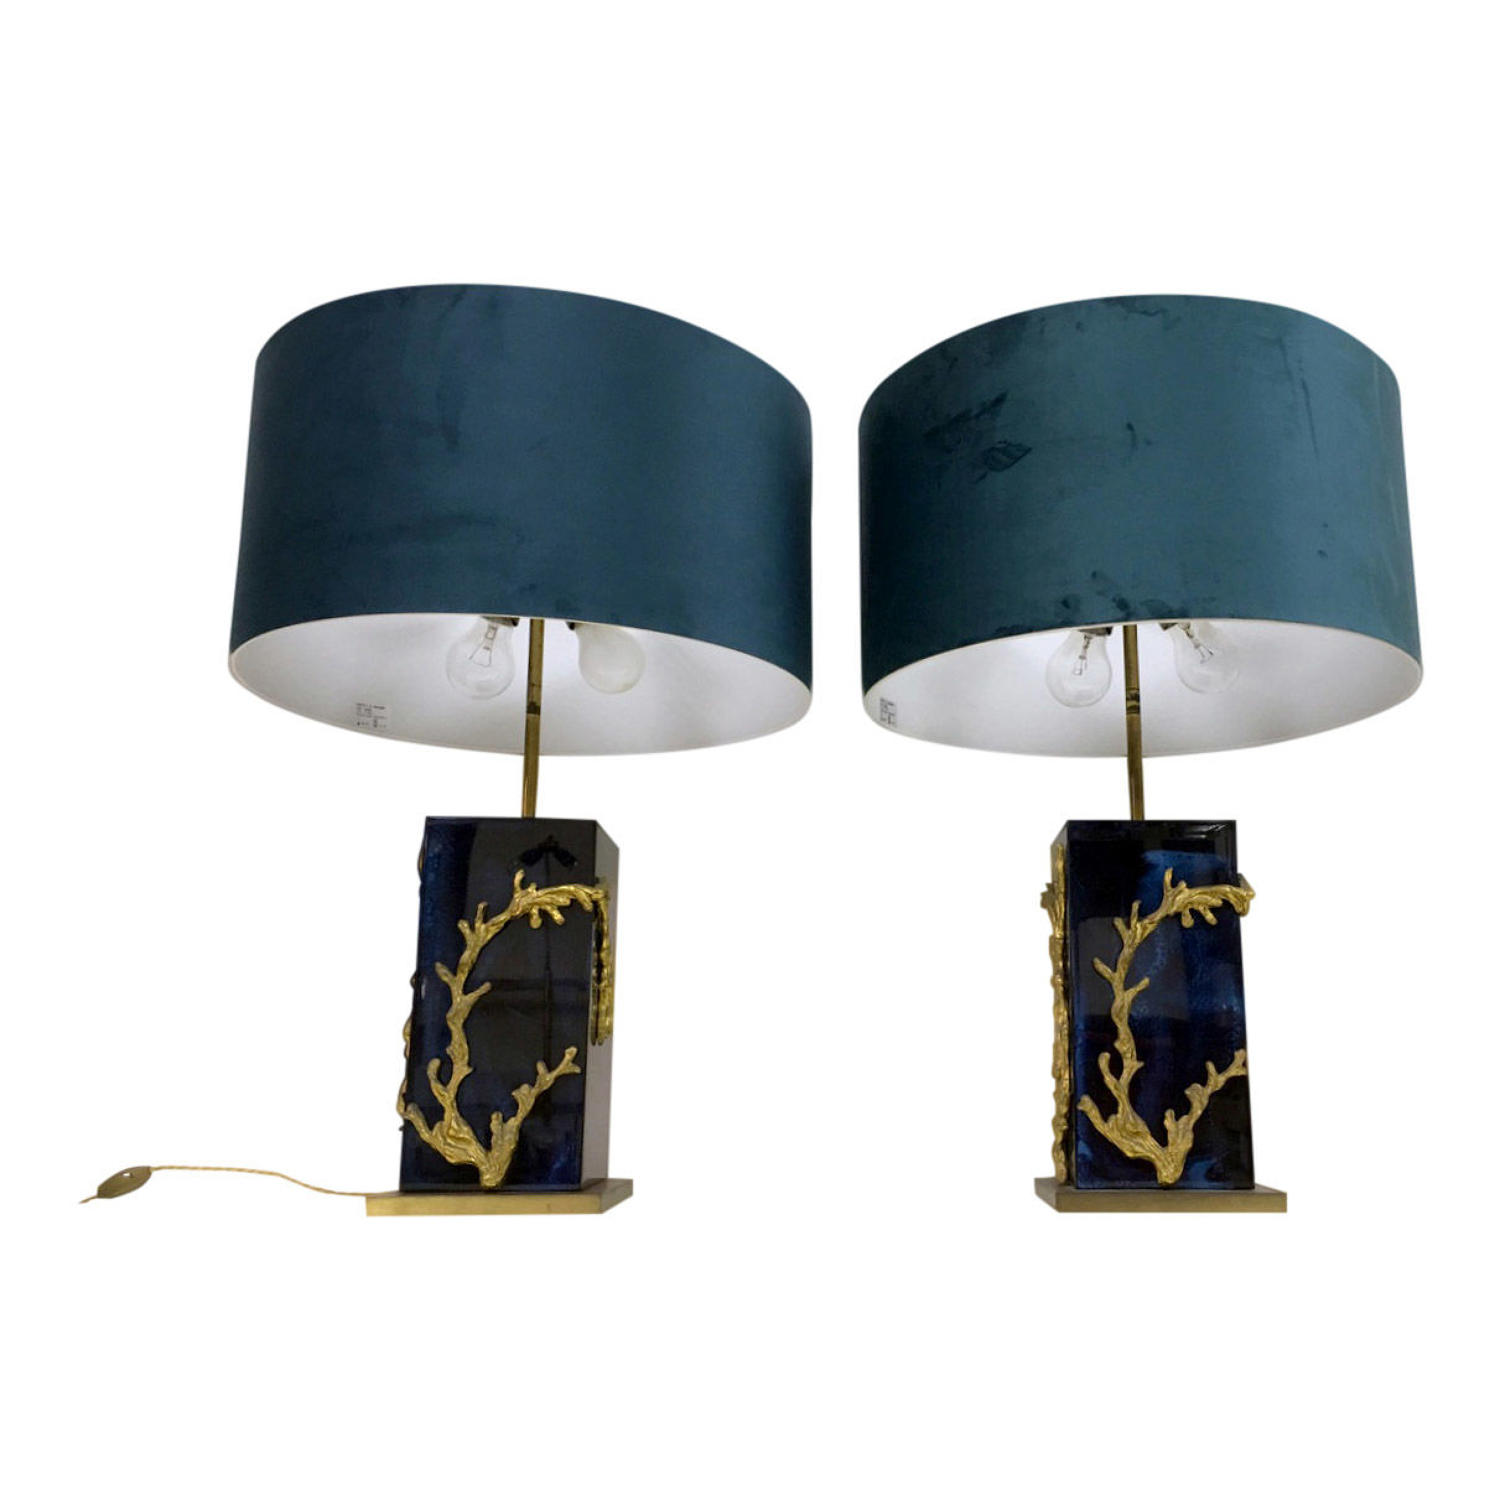 A pair of Algue table lamps by Maison Charles